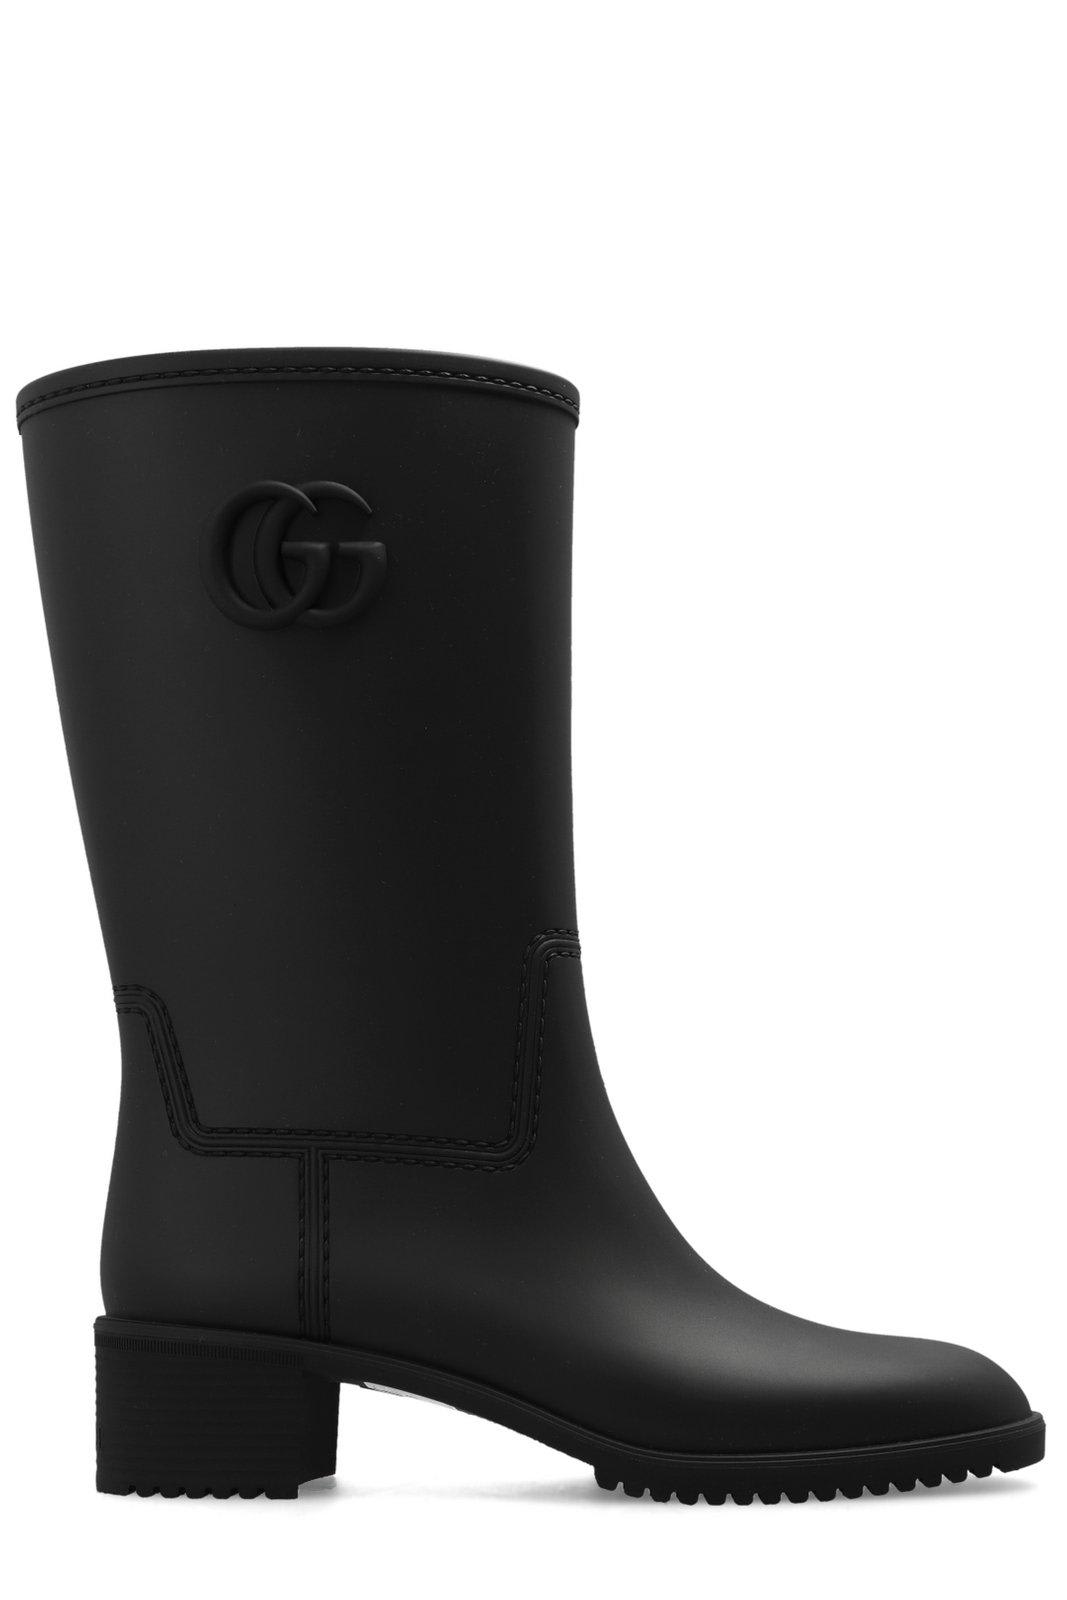 GUCCI DOUBLE G BOOTS